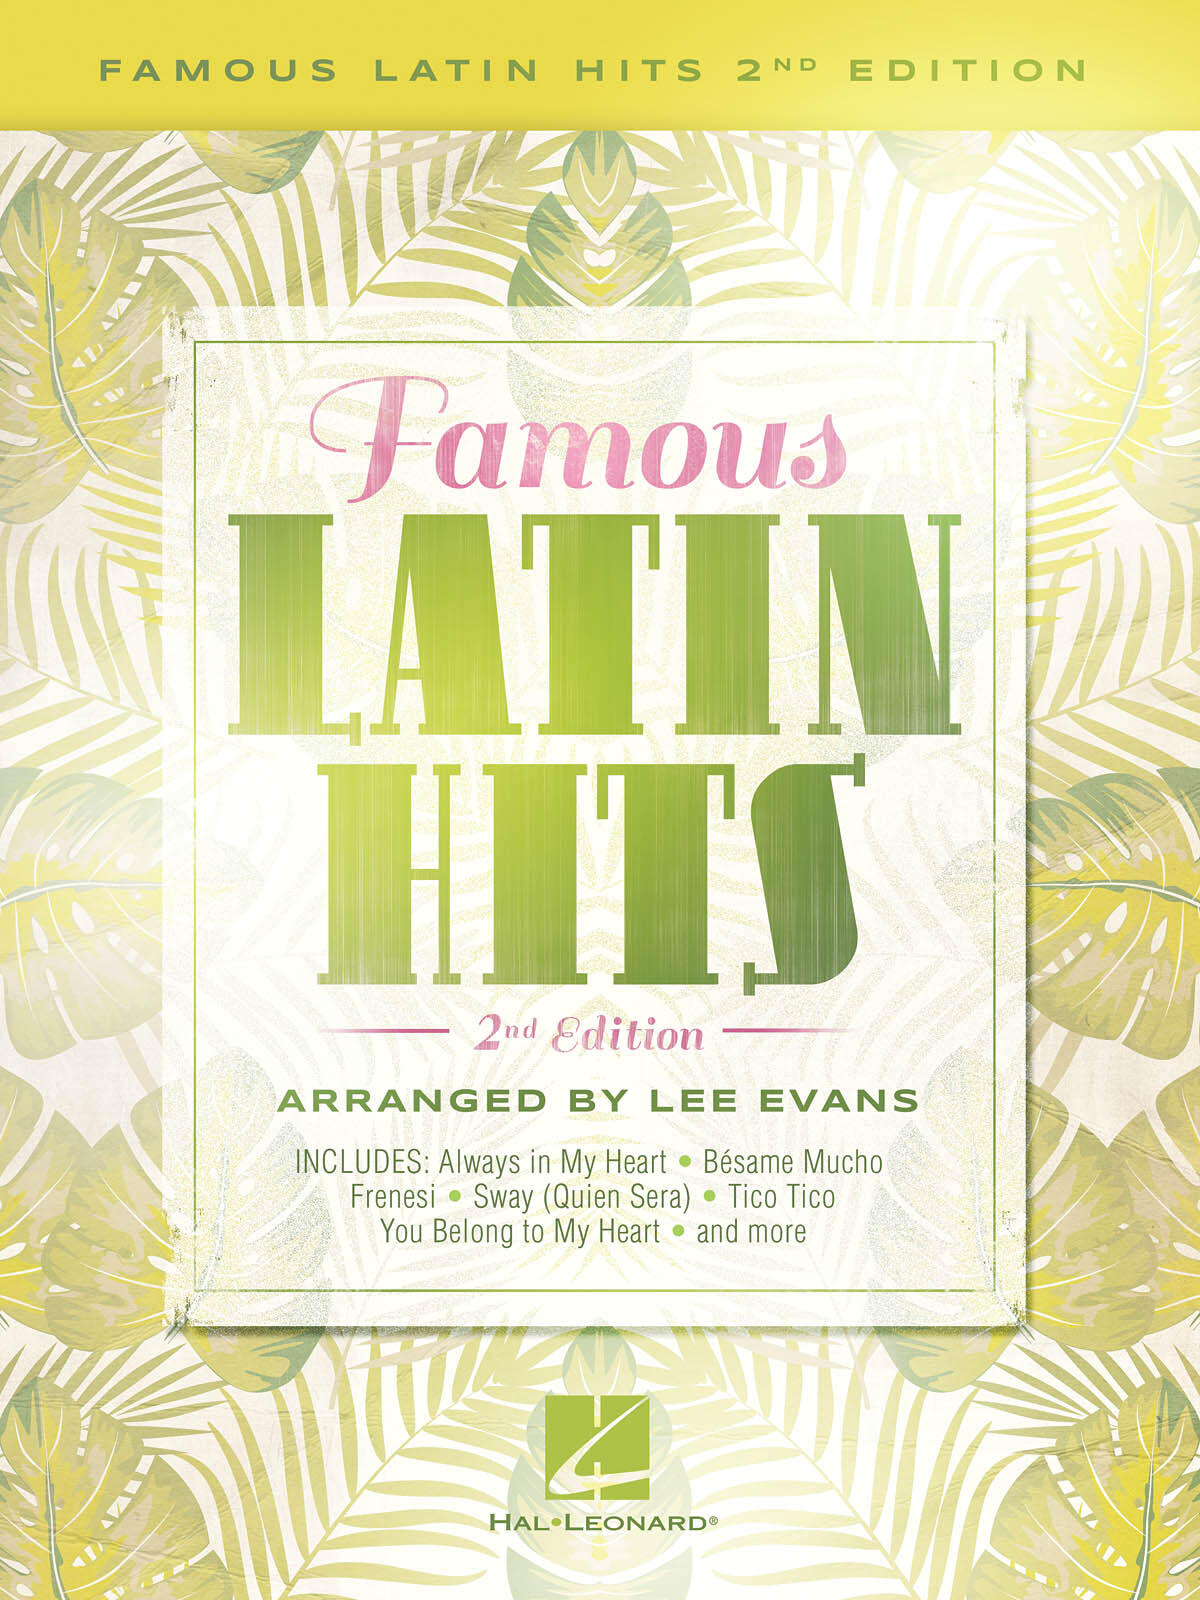 Famous Latin Hits - 2nd Edition   Lee Evans : photo 1